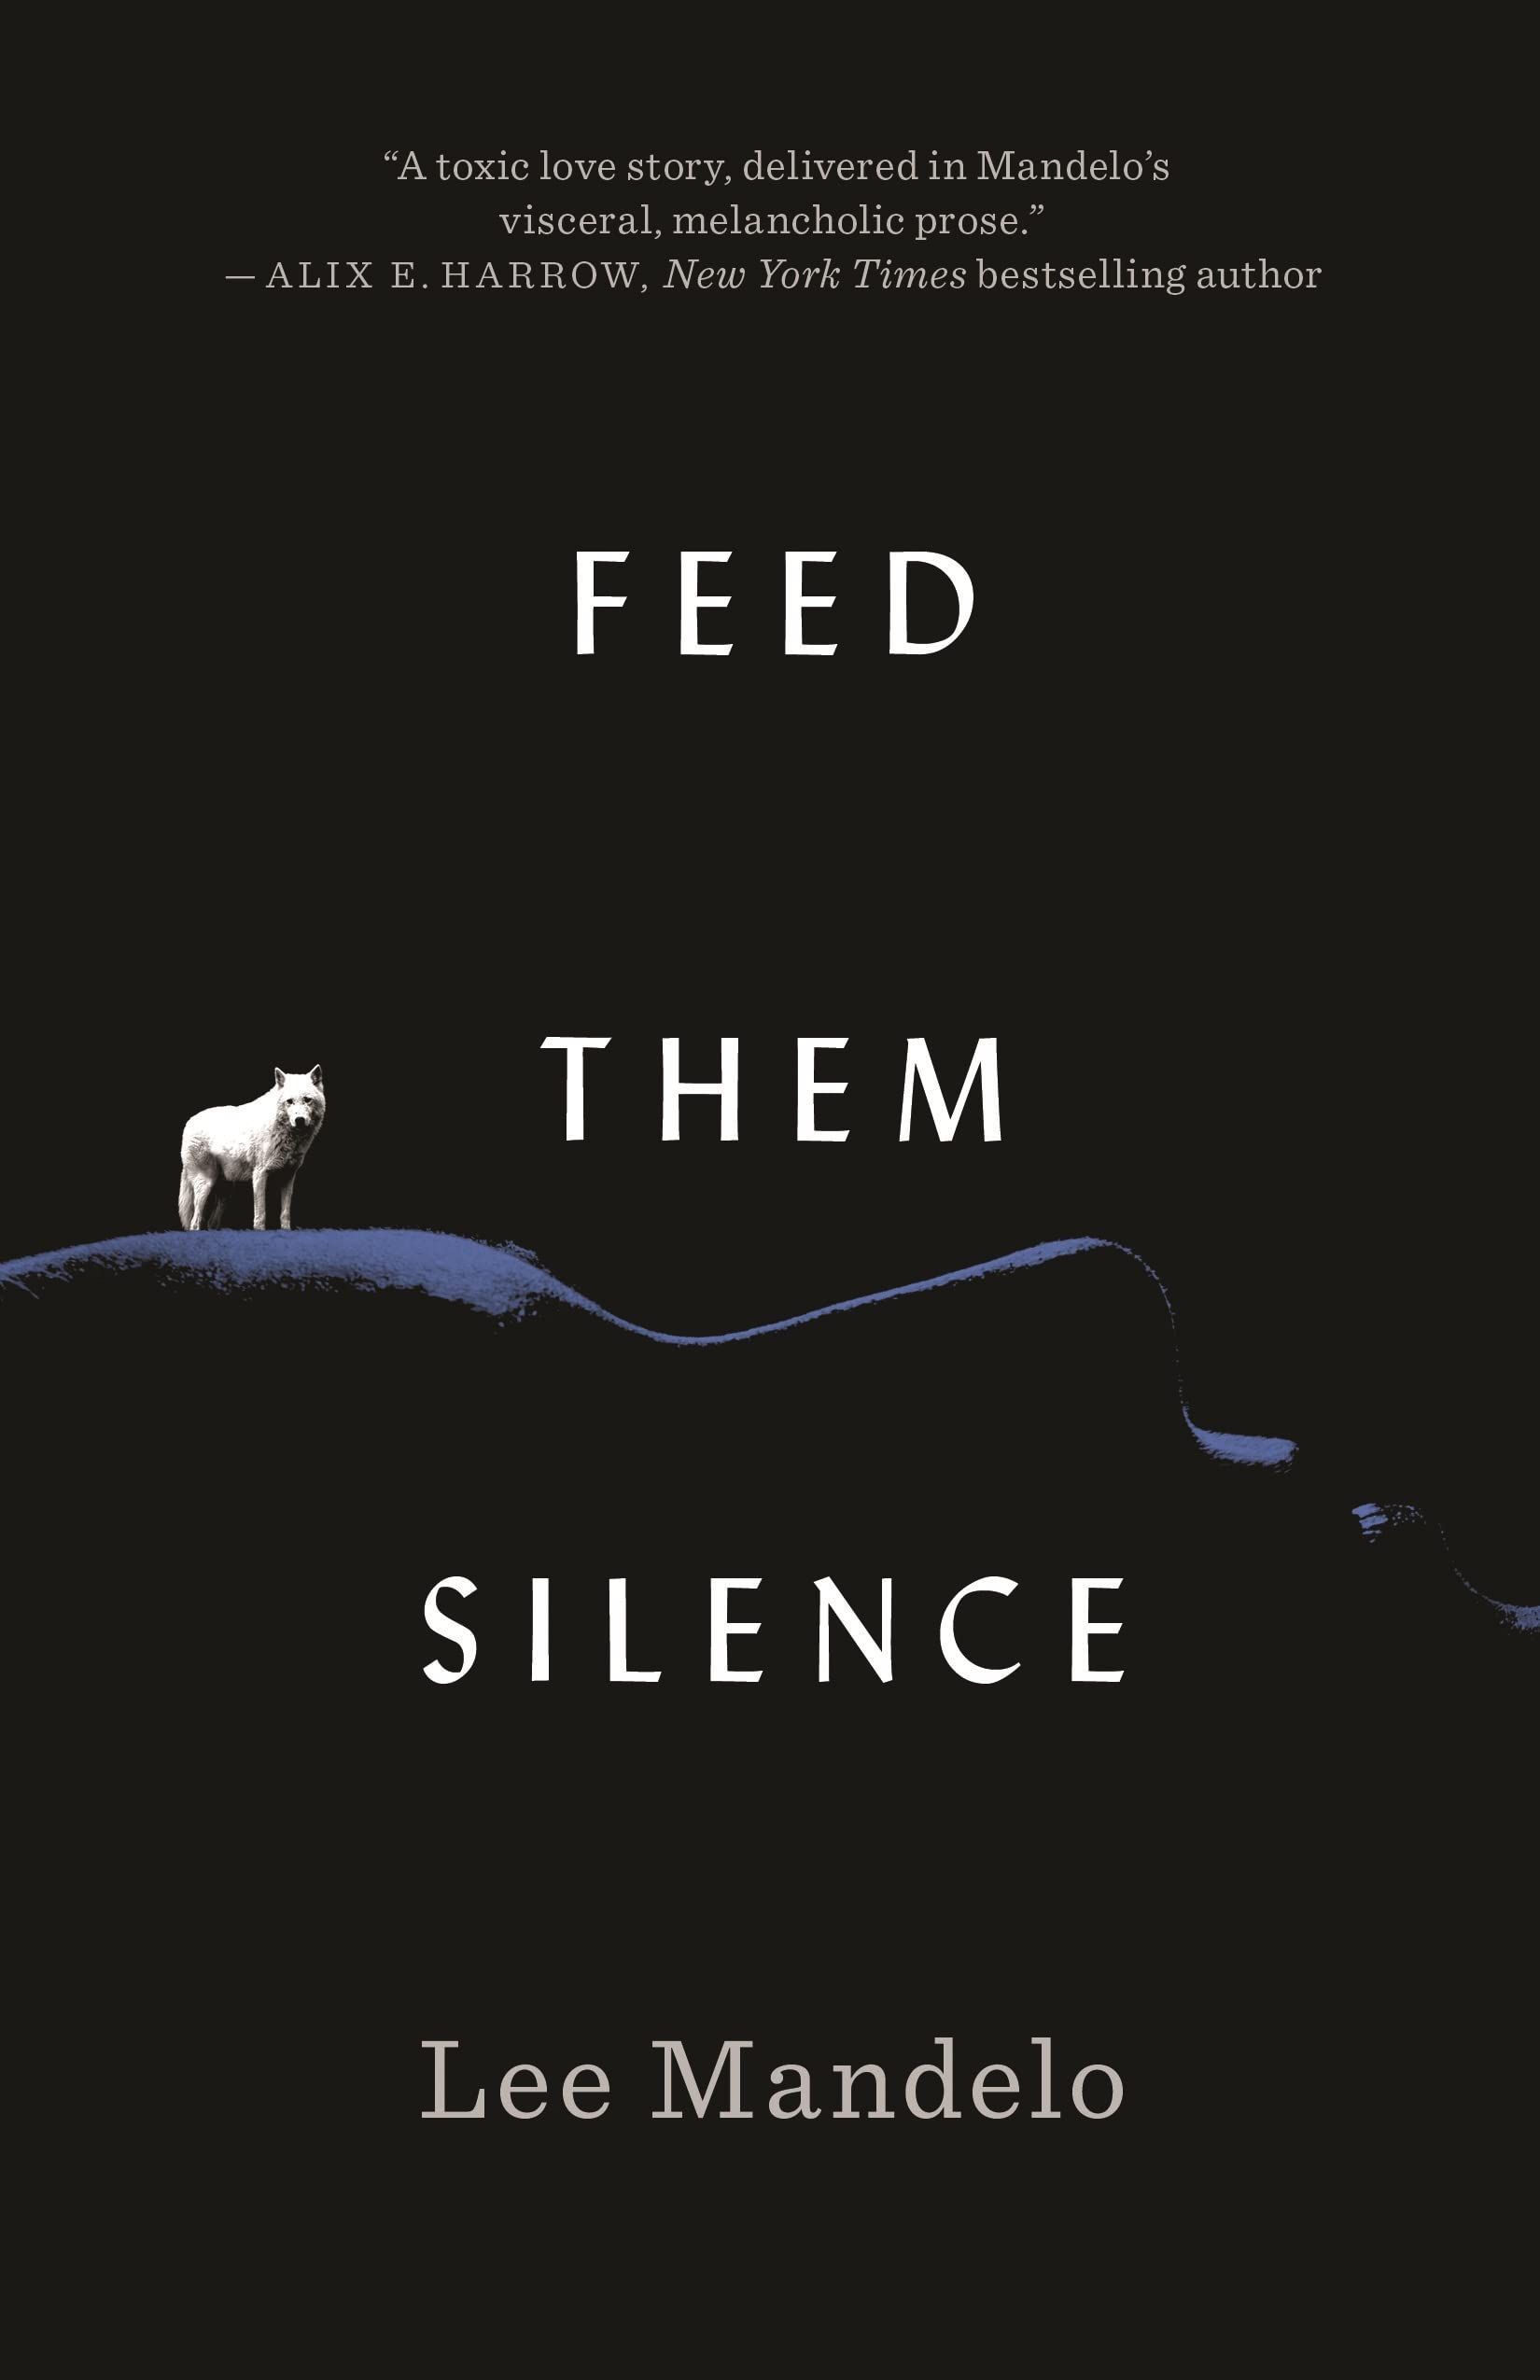 Wolves at the Door: On Lee Mandelo’s “Feed Them Silence”